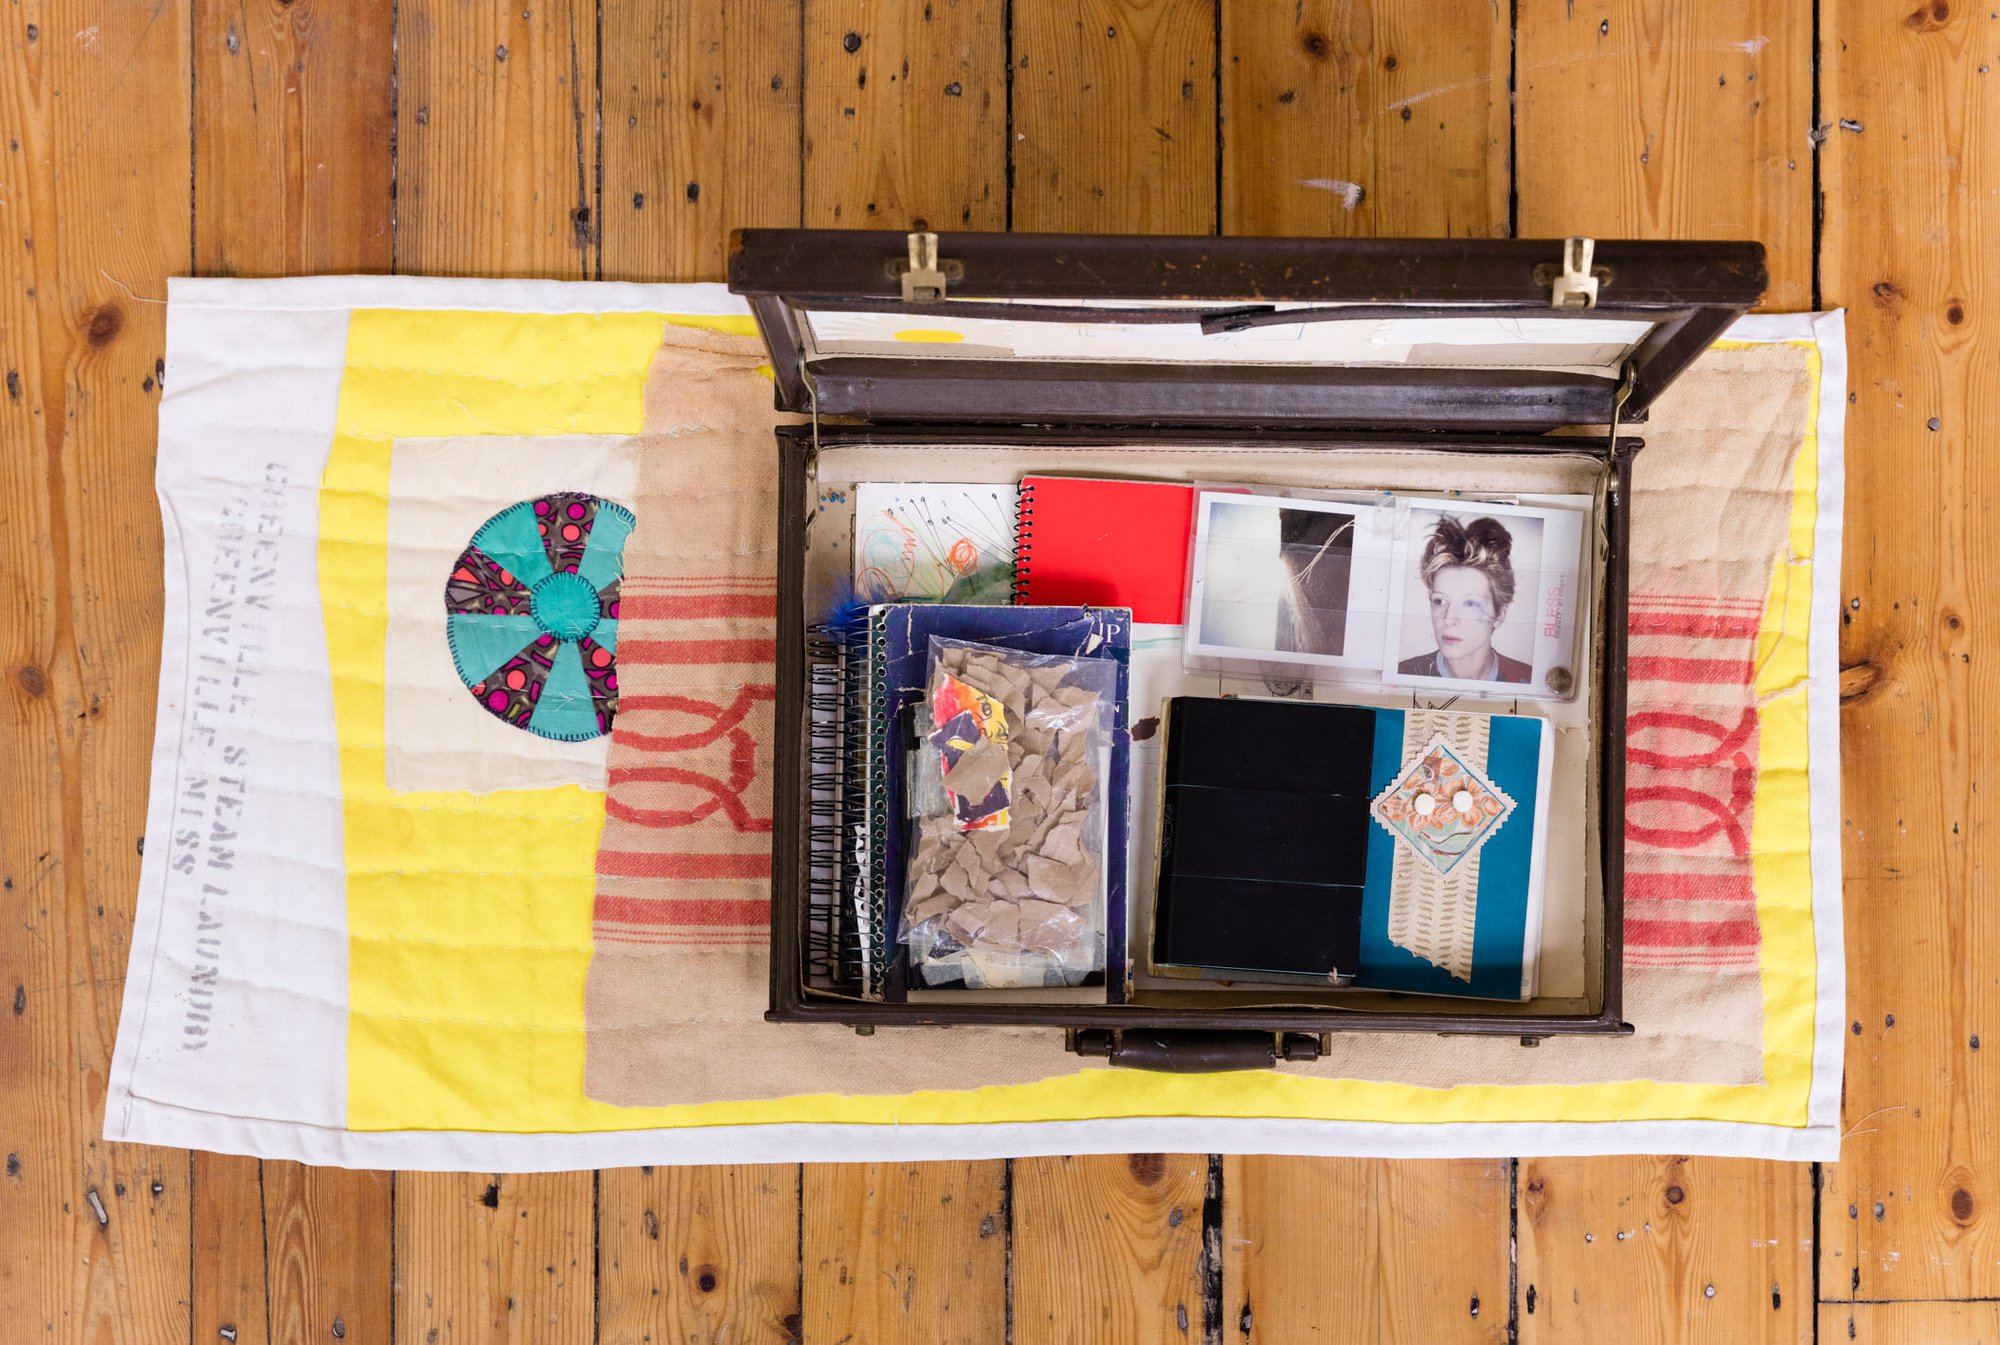 Susan Cianciolo, Briefcase Kit, briefcase, ink and pencil on paper, torn brown paper in plastic bag, archival books from: Love Life, Run 8, Run 10, Small Things &amp; Games and Museum for Moderne Kunst Costumes [book] on handmade quilt by Coulter Fussell, 40.64 x 46.99 x 96.52 cm, 1997–2015